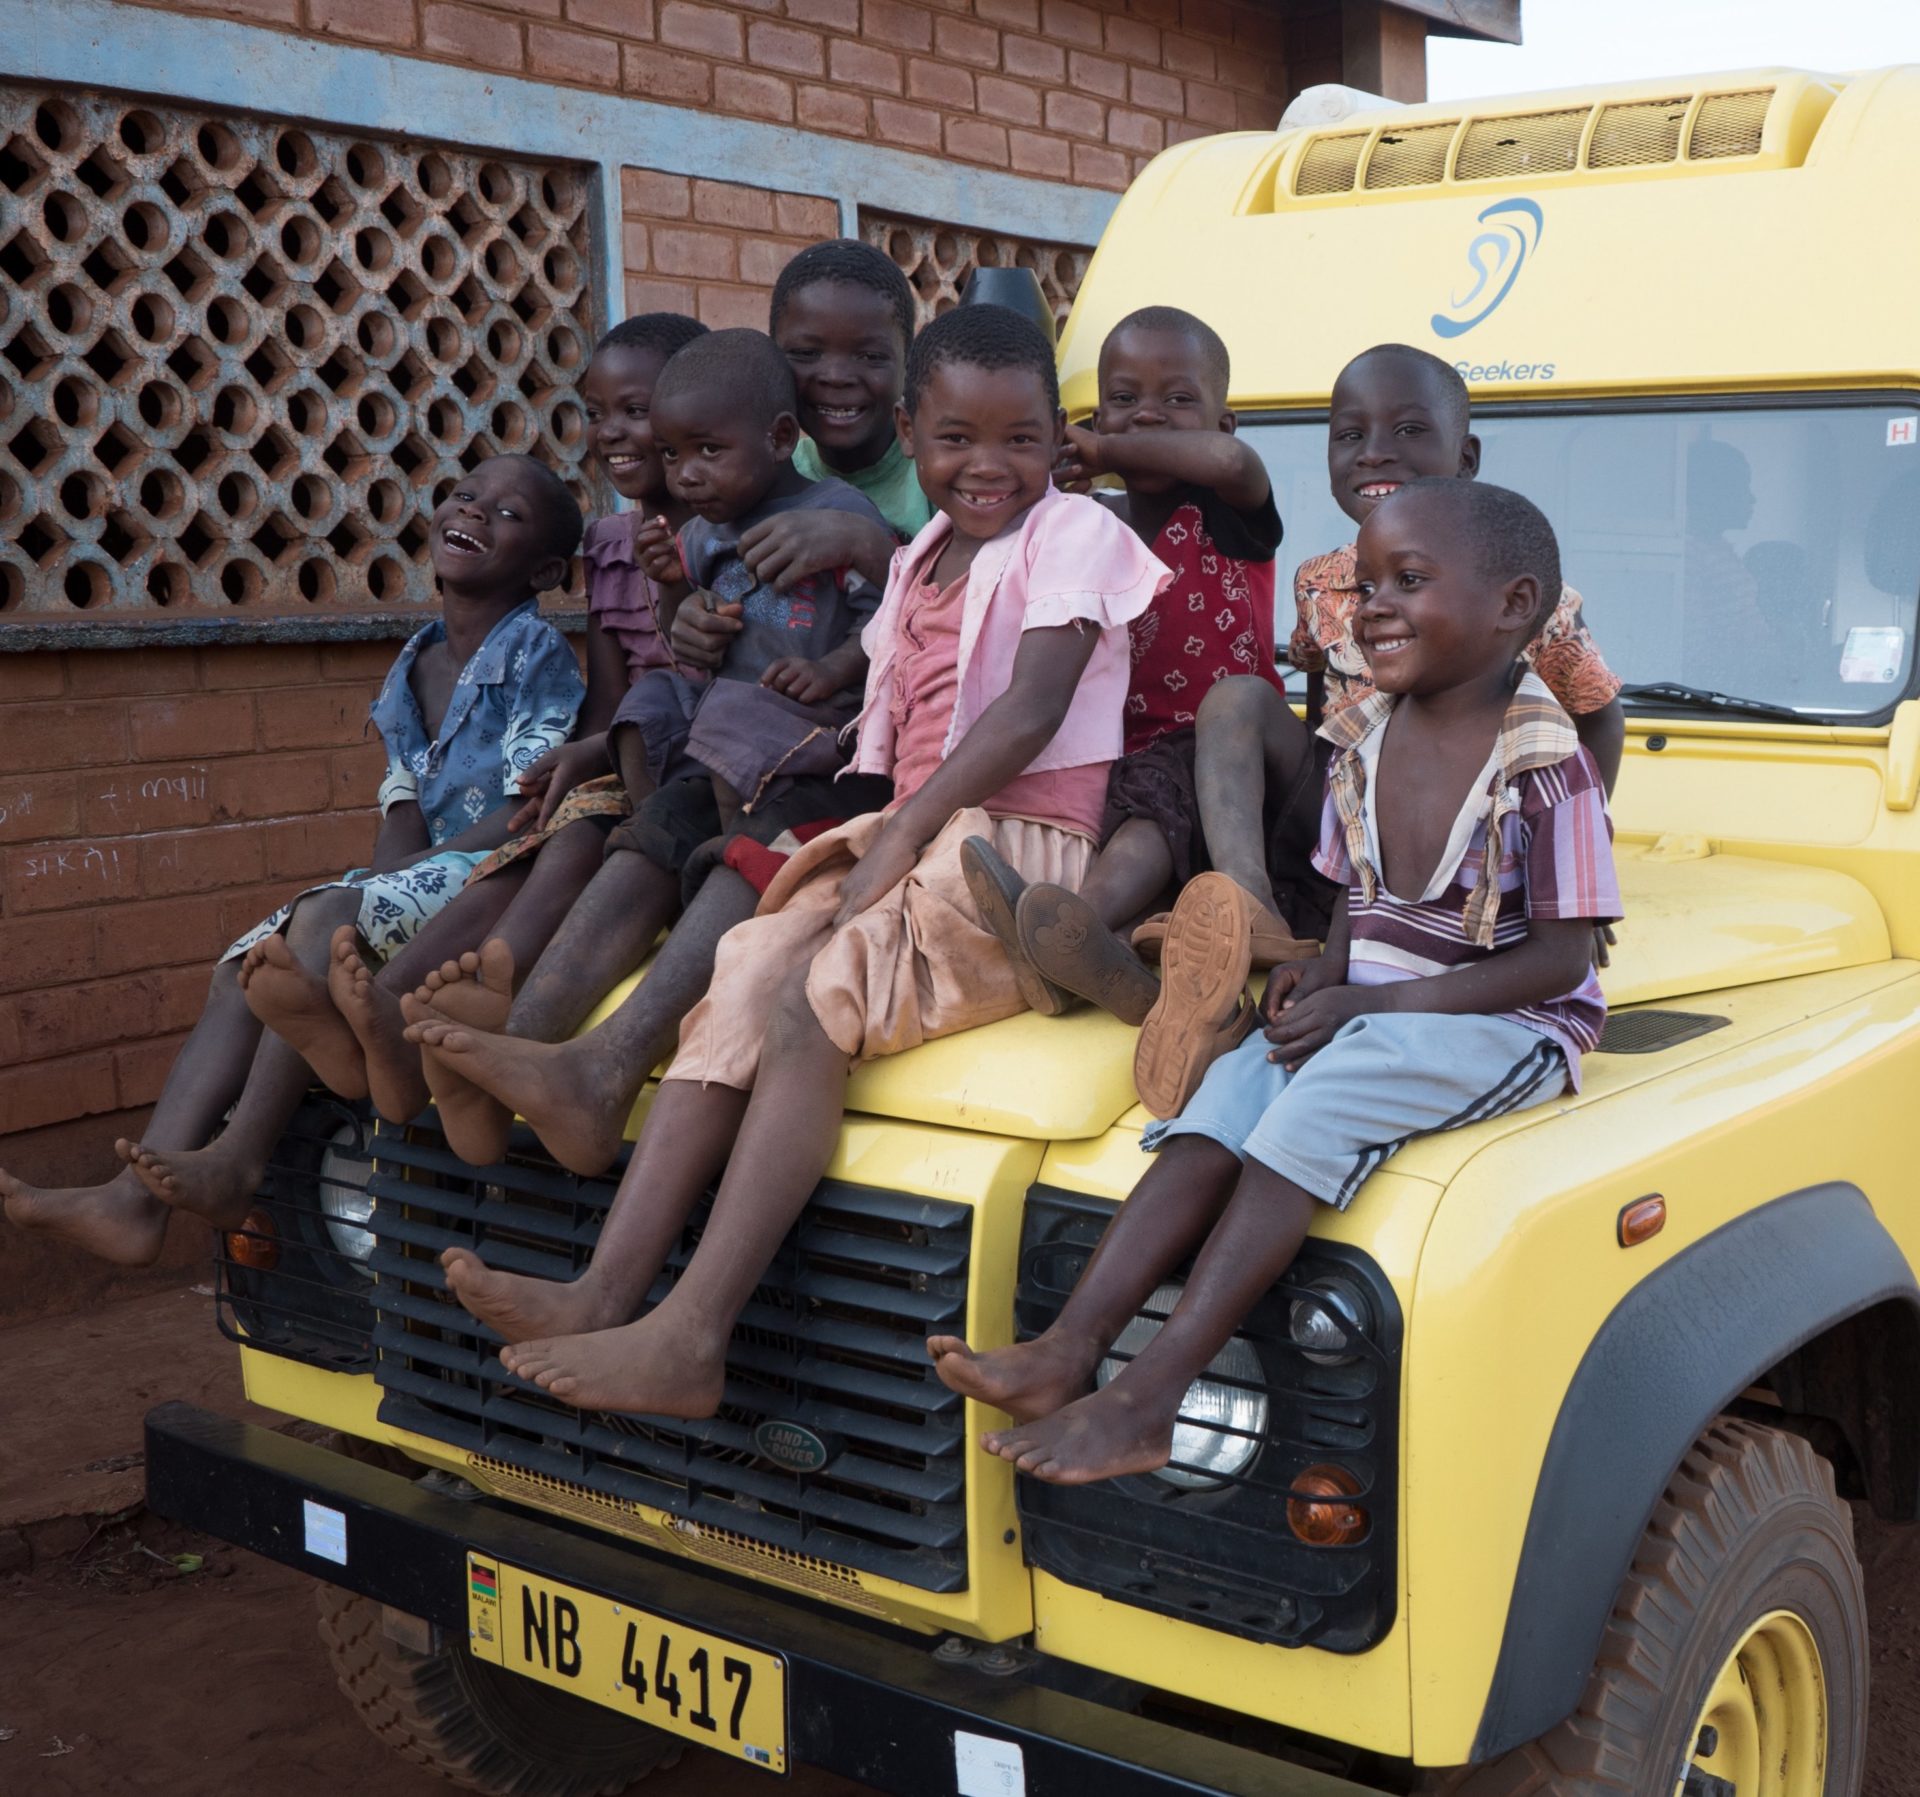 kinds sitting on truck in Zambia